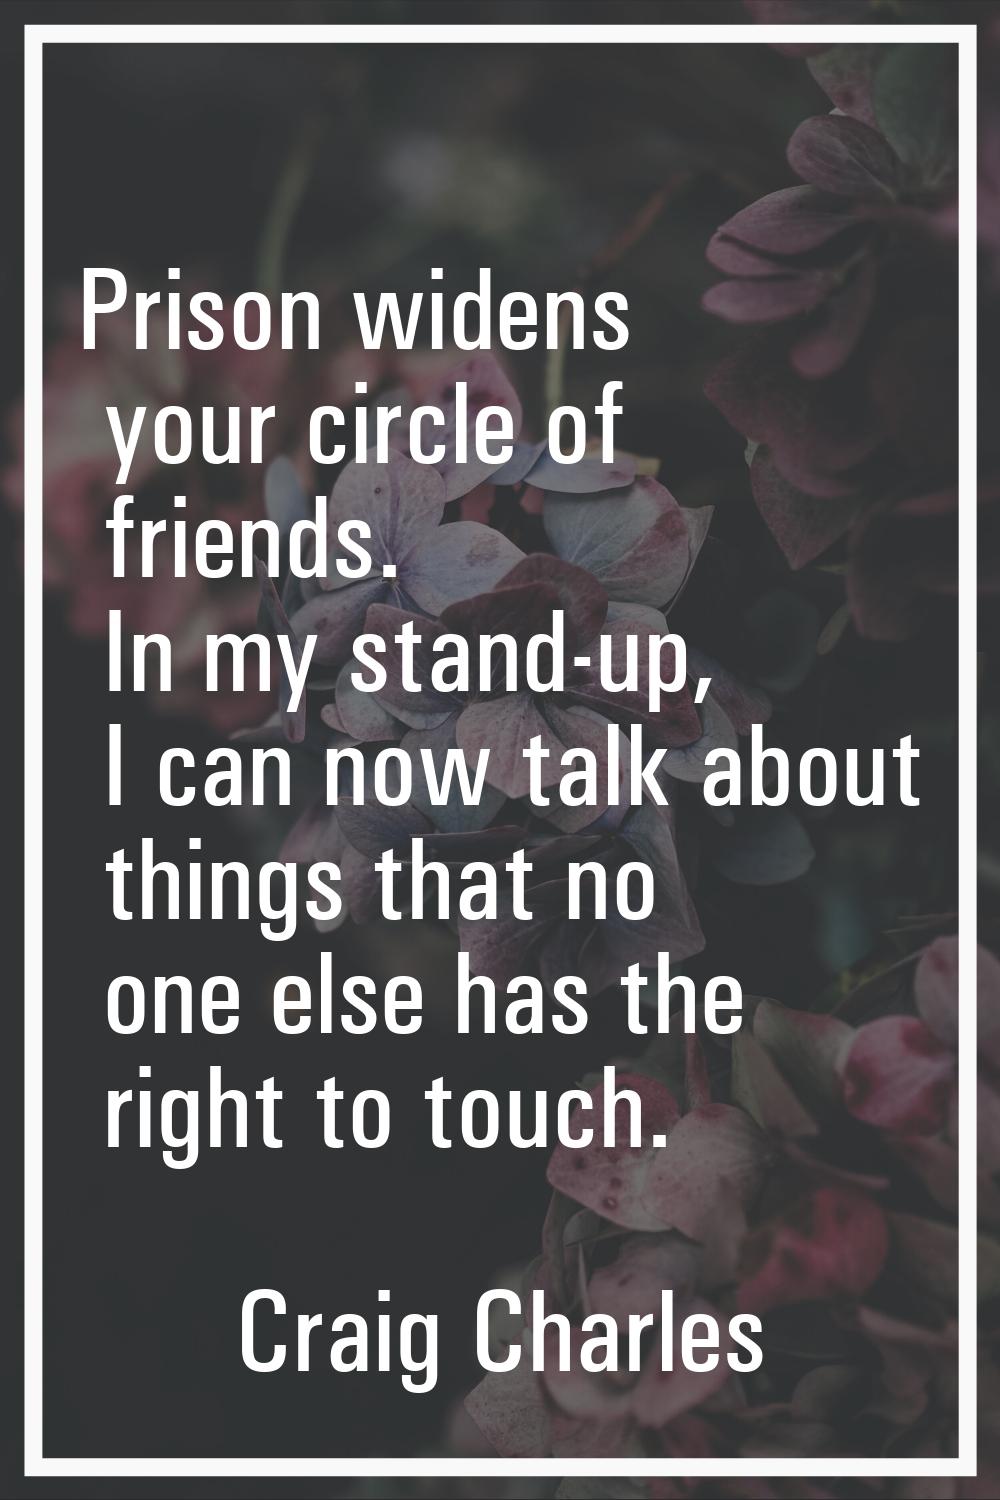 Prison widens your circle of friends. In my stand-up, I can now talk about things that no one else 